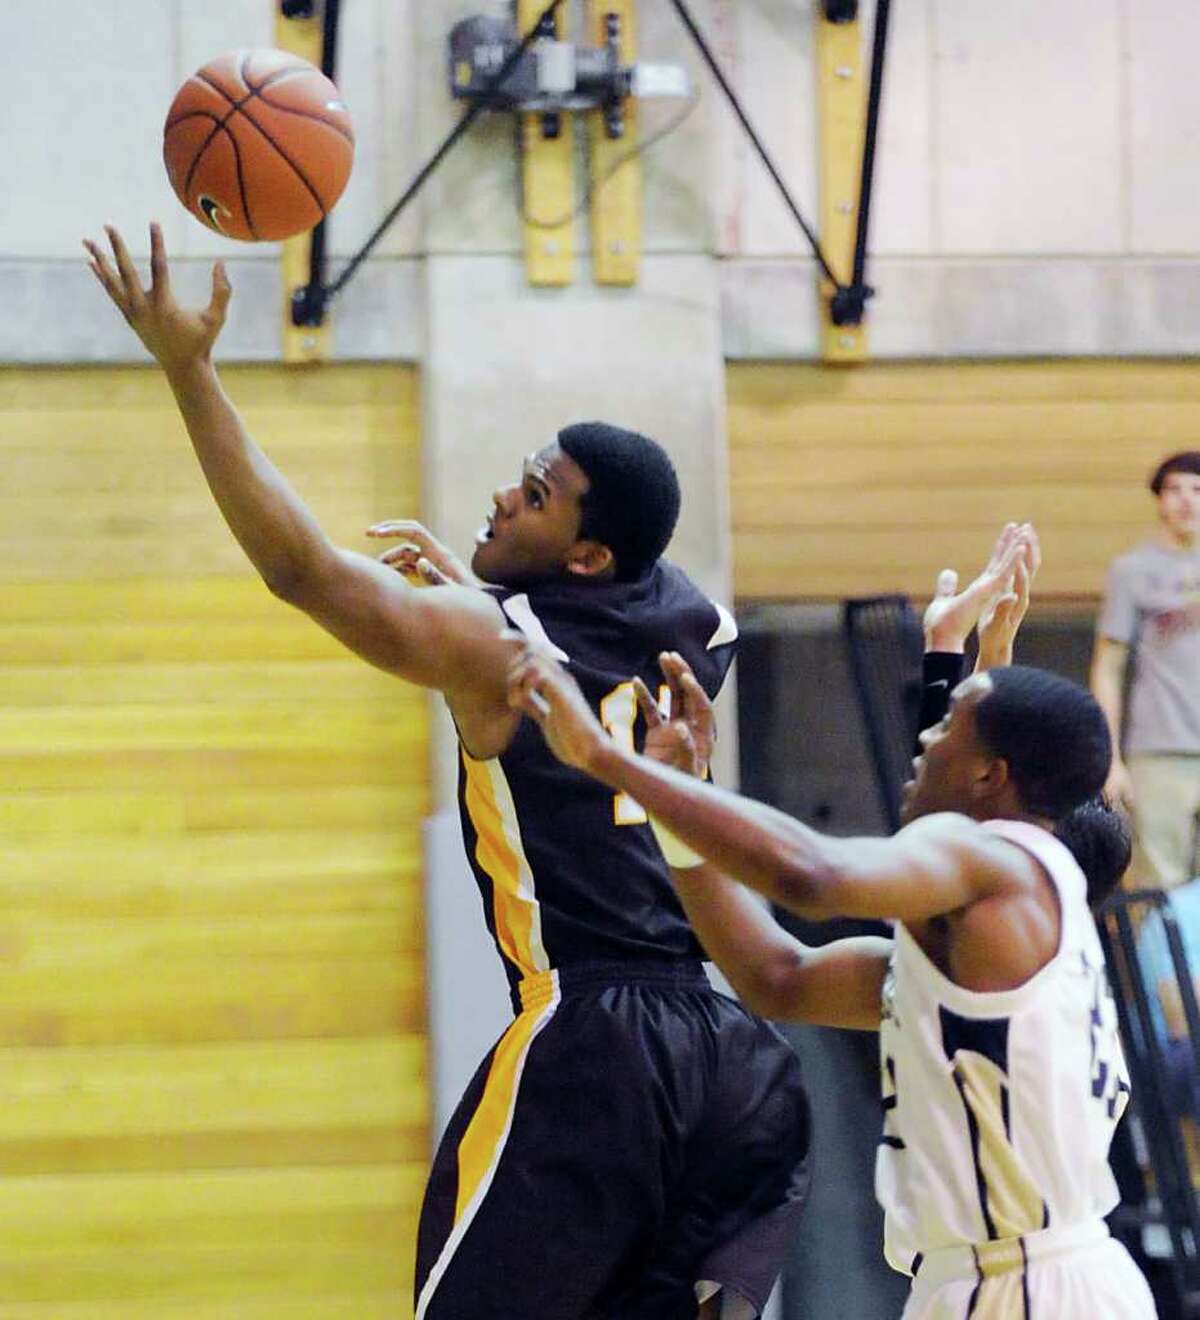 At left, Donqutae Robinson # 14 of Brunswick grabs a rebound while being defended by Darren Douglas # 22 of Rye Country Day School during boys high school baskebtball between Brunswick School and Rye Country Day School, at Brunswick School, Tuesday night, Jan. 31, 2011.